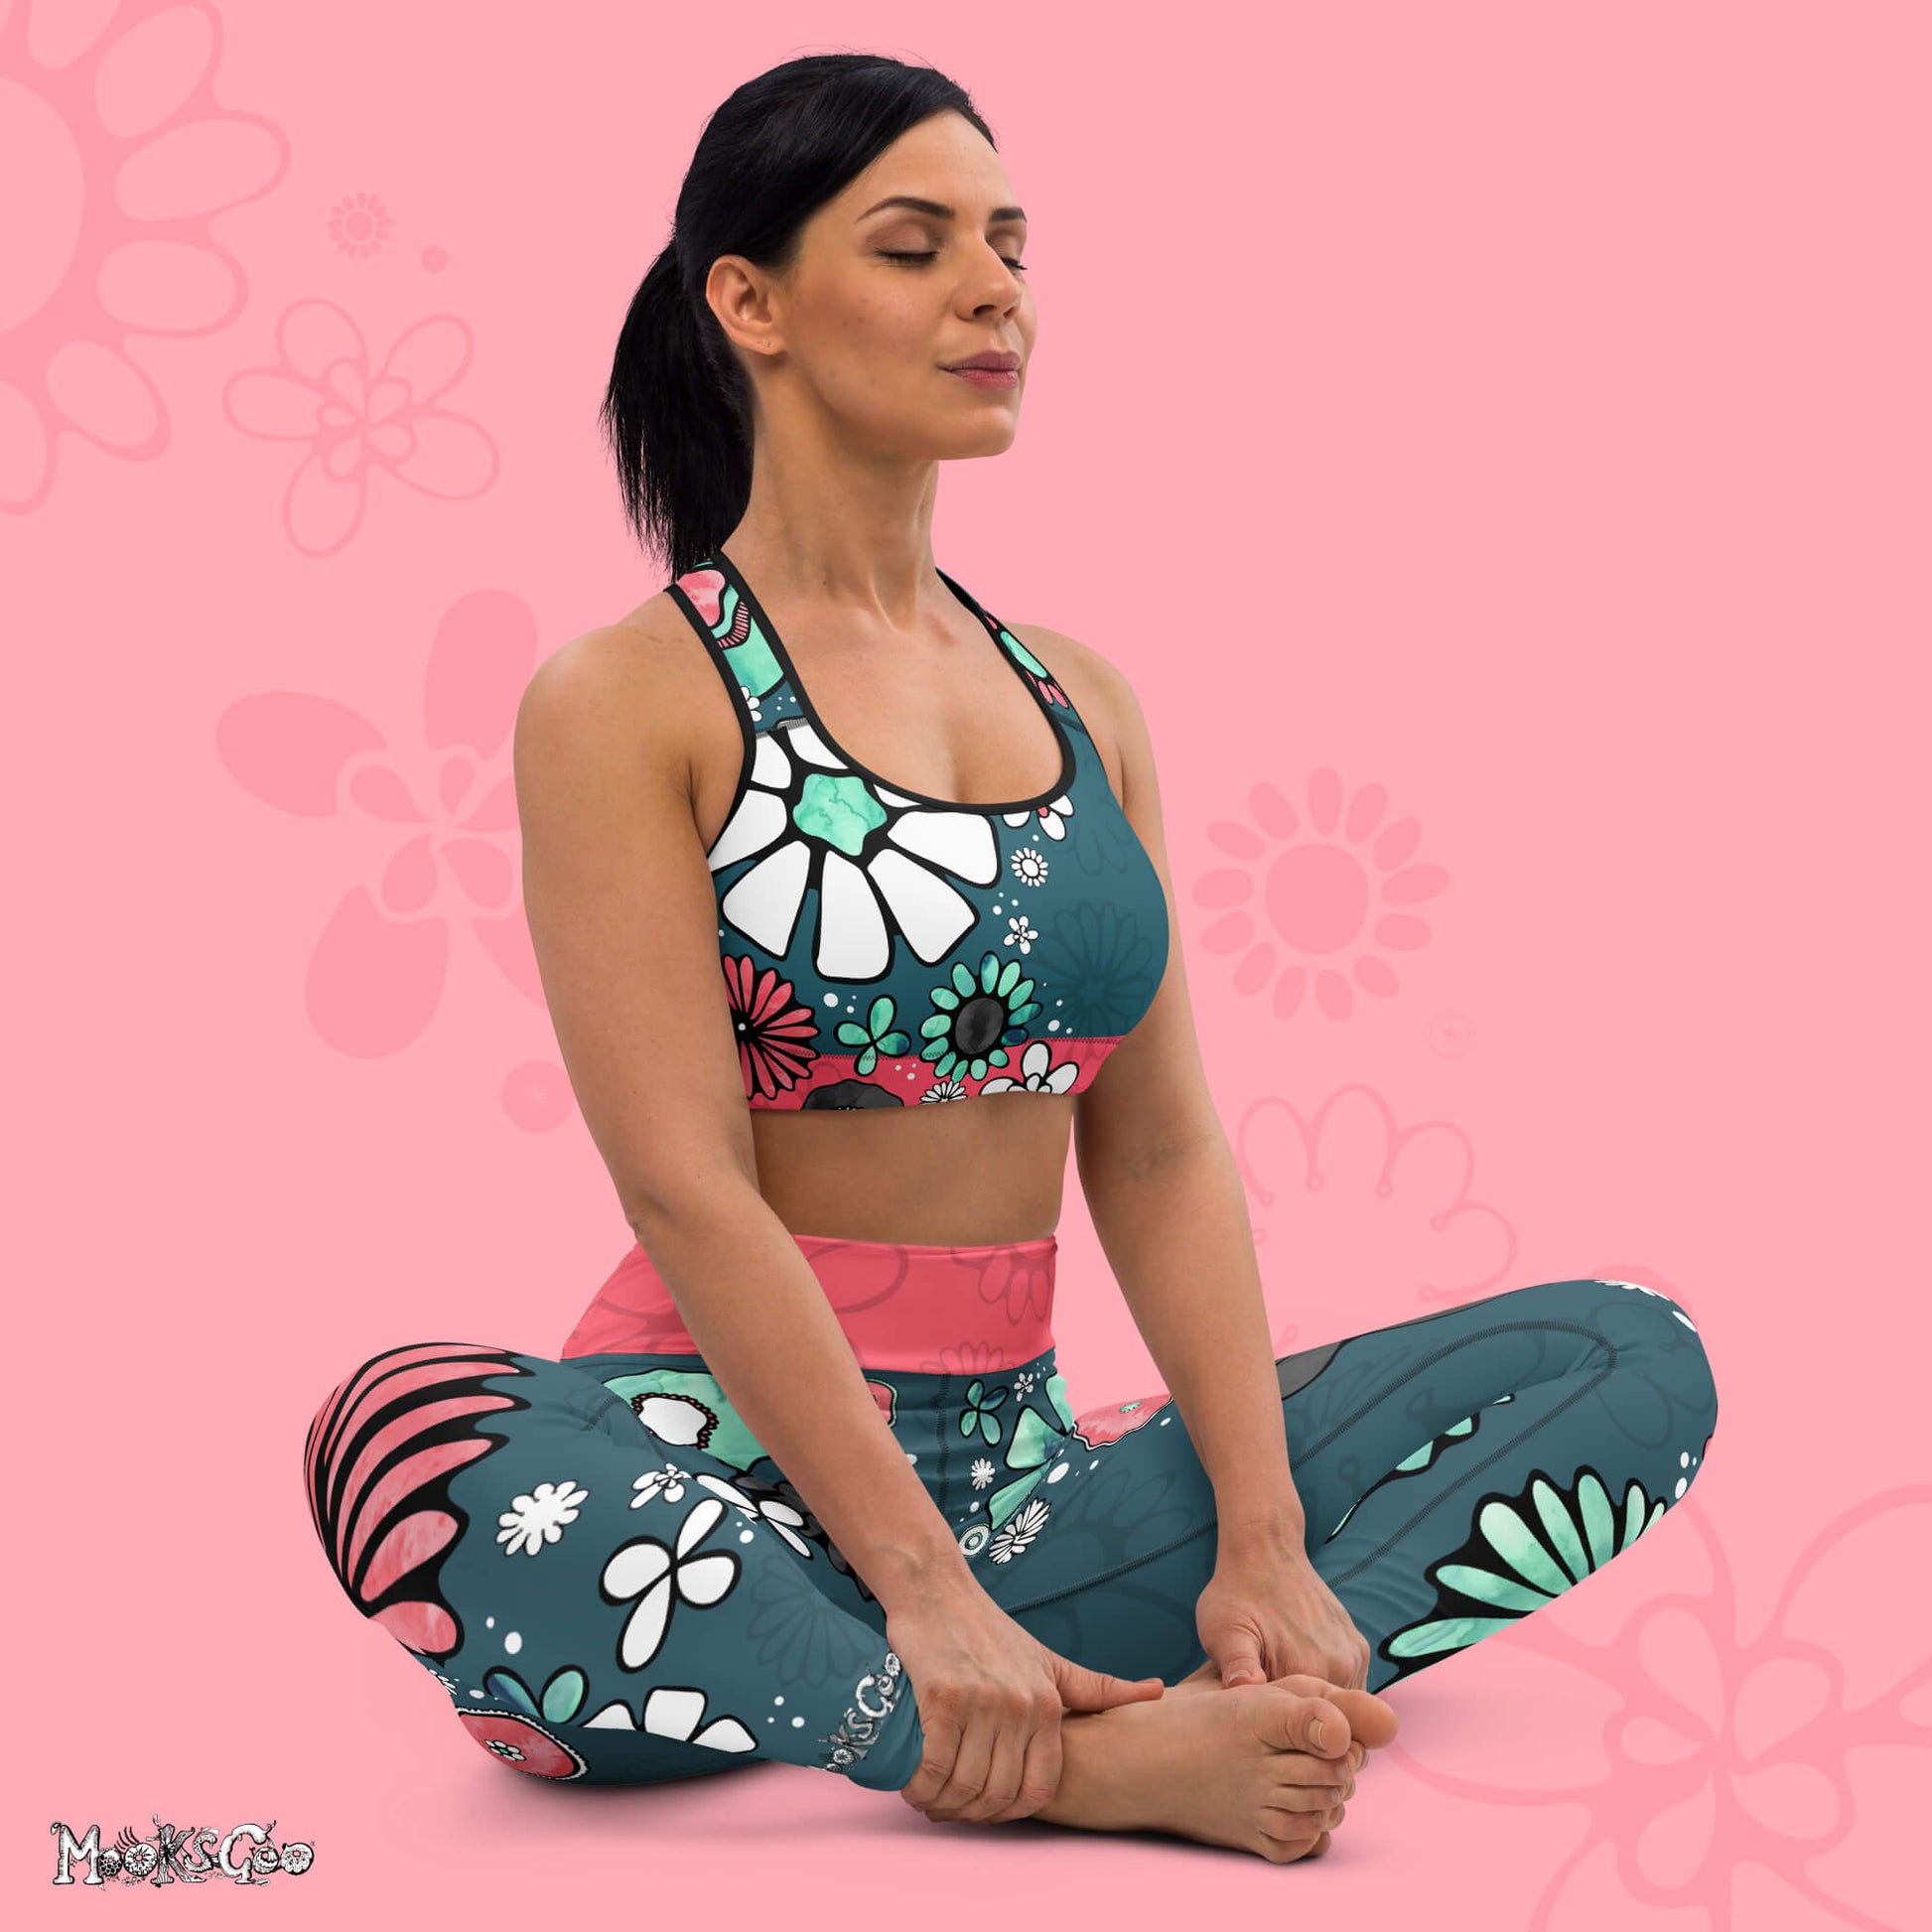 Flower power yoga and workout leisurewear high waisted leggings designed by MooksGoo - yoga pose model 